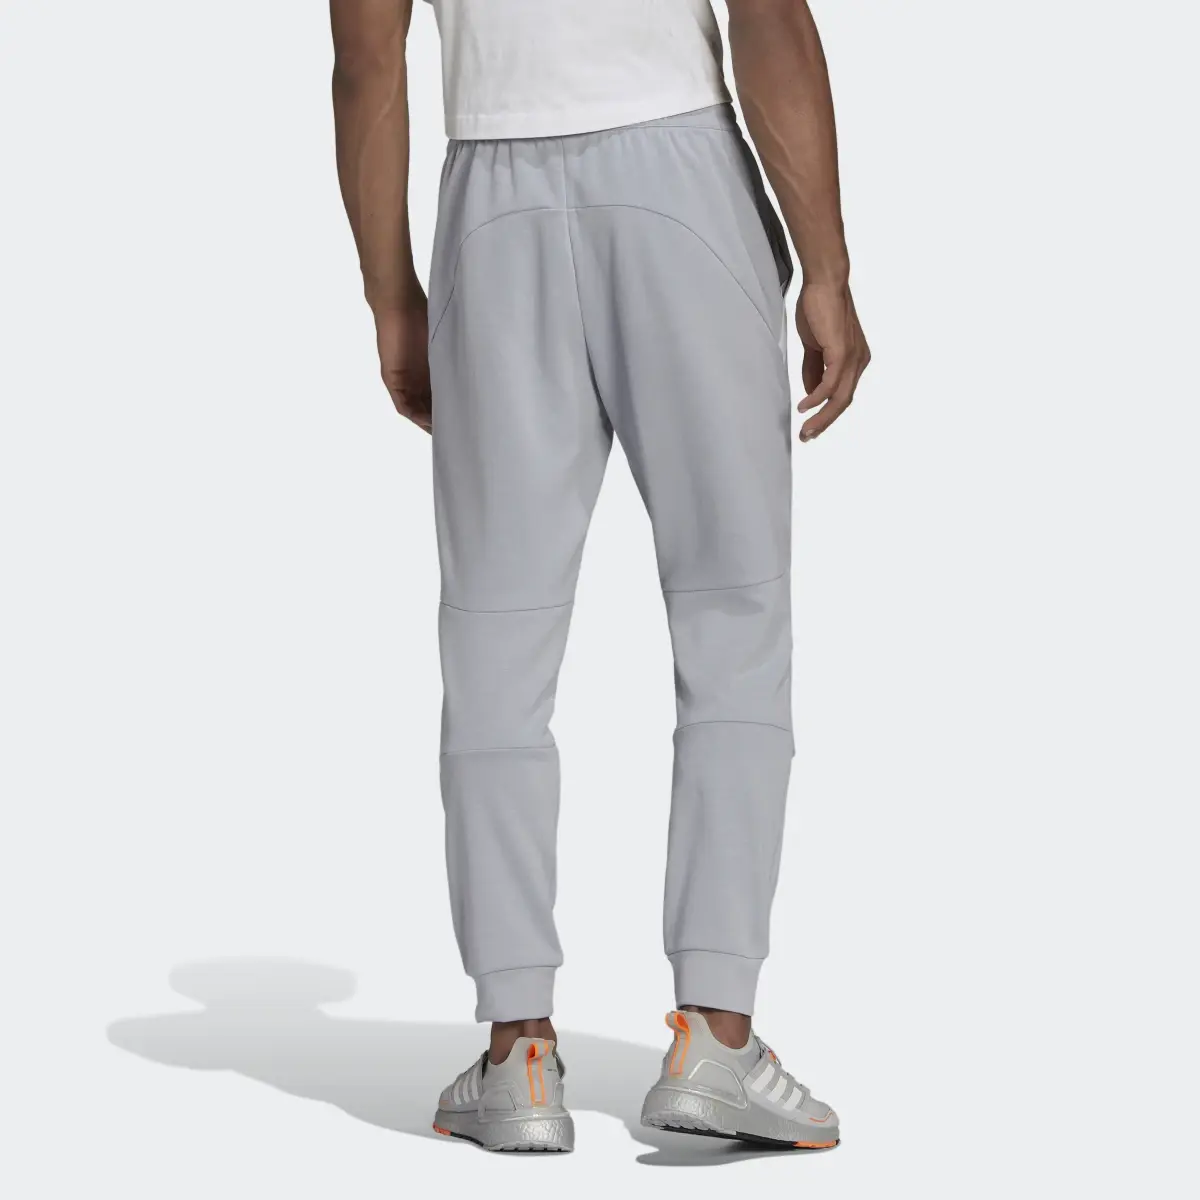 Adidas Designed for Gameday Pants. 2